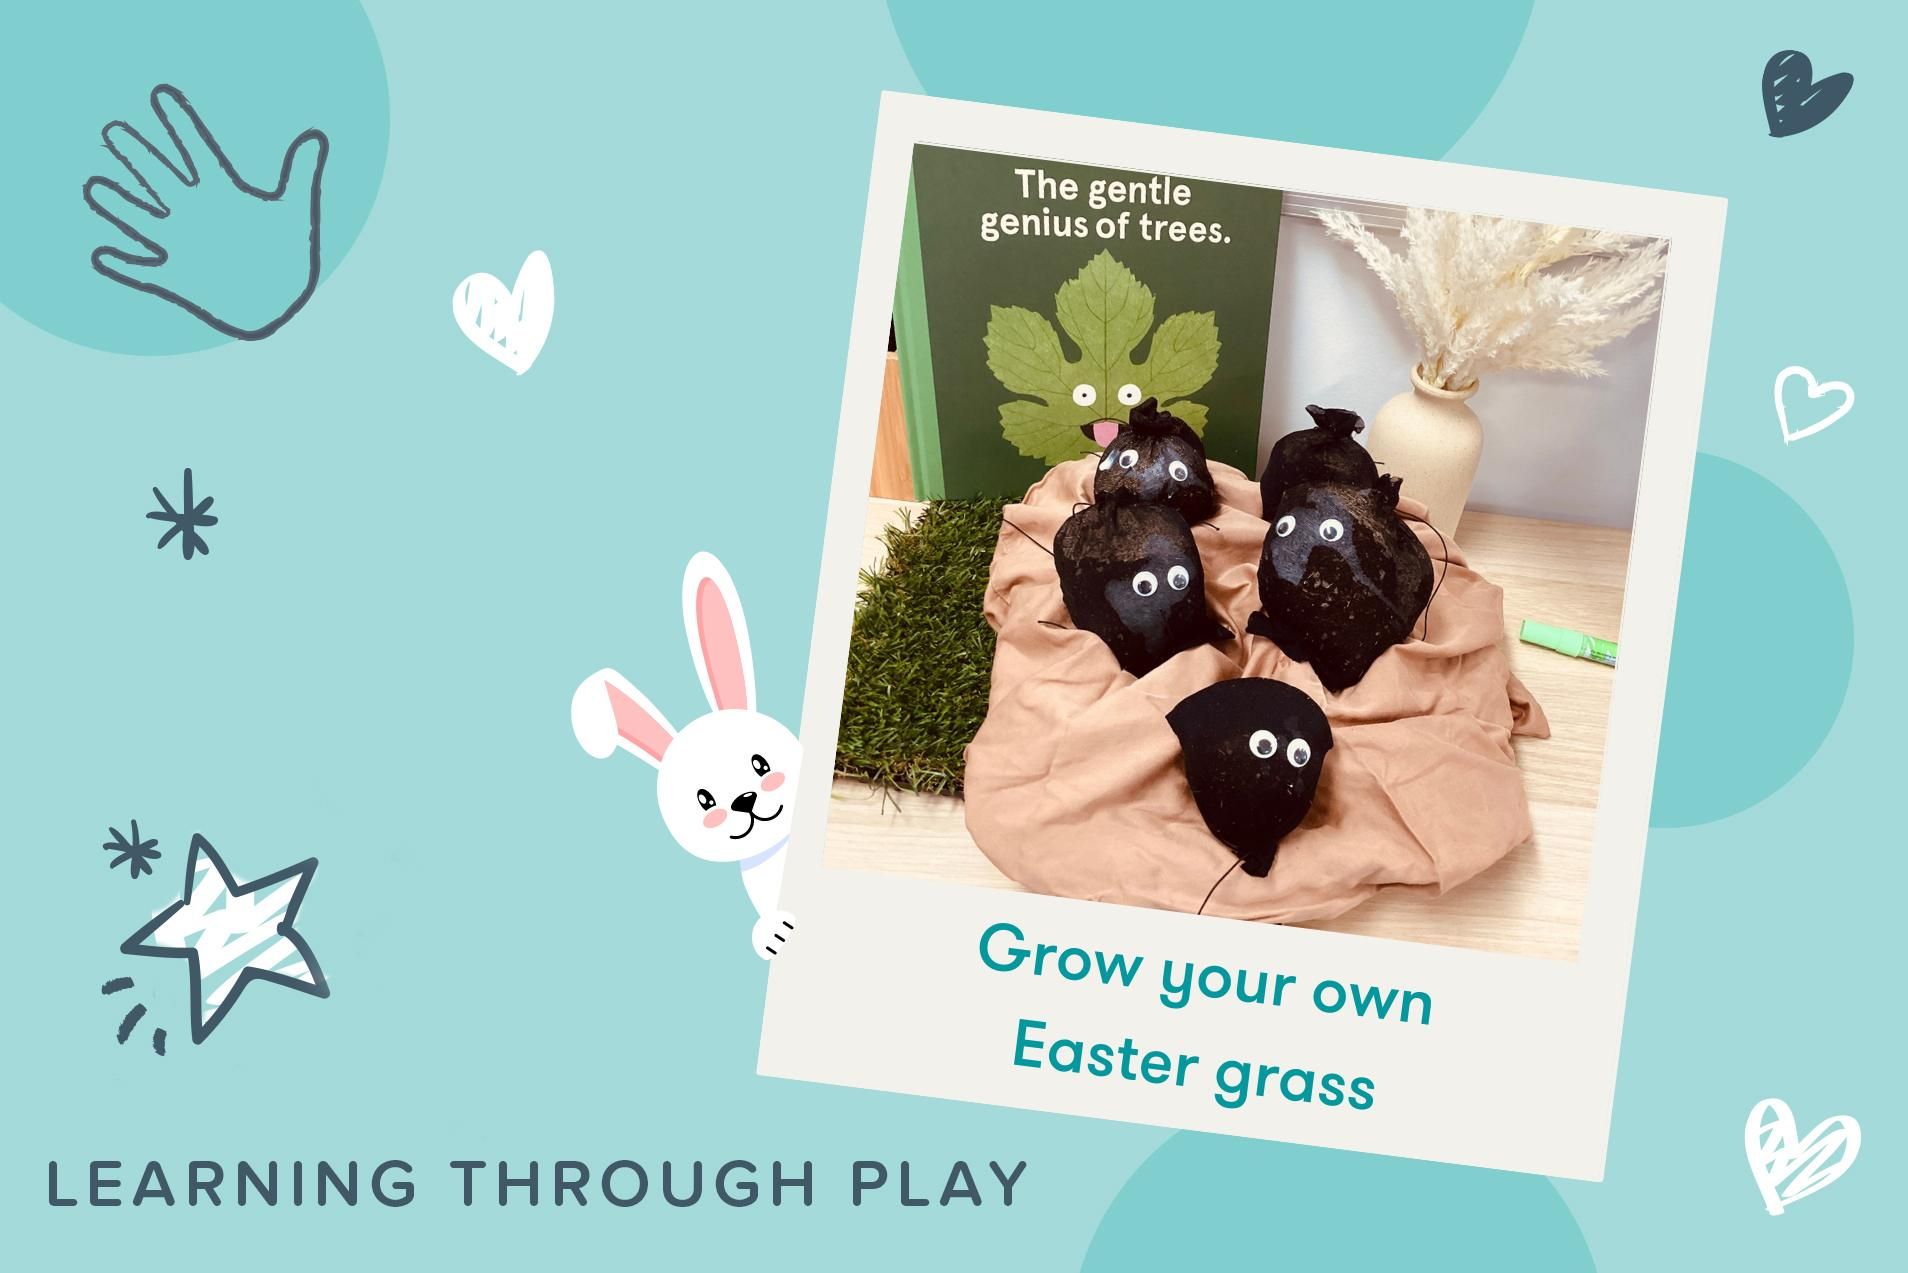 Learning Through Play: Grow your own Easter grass